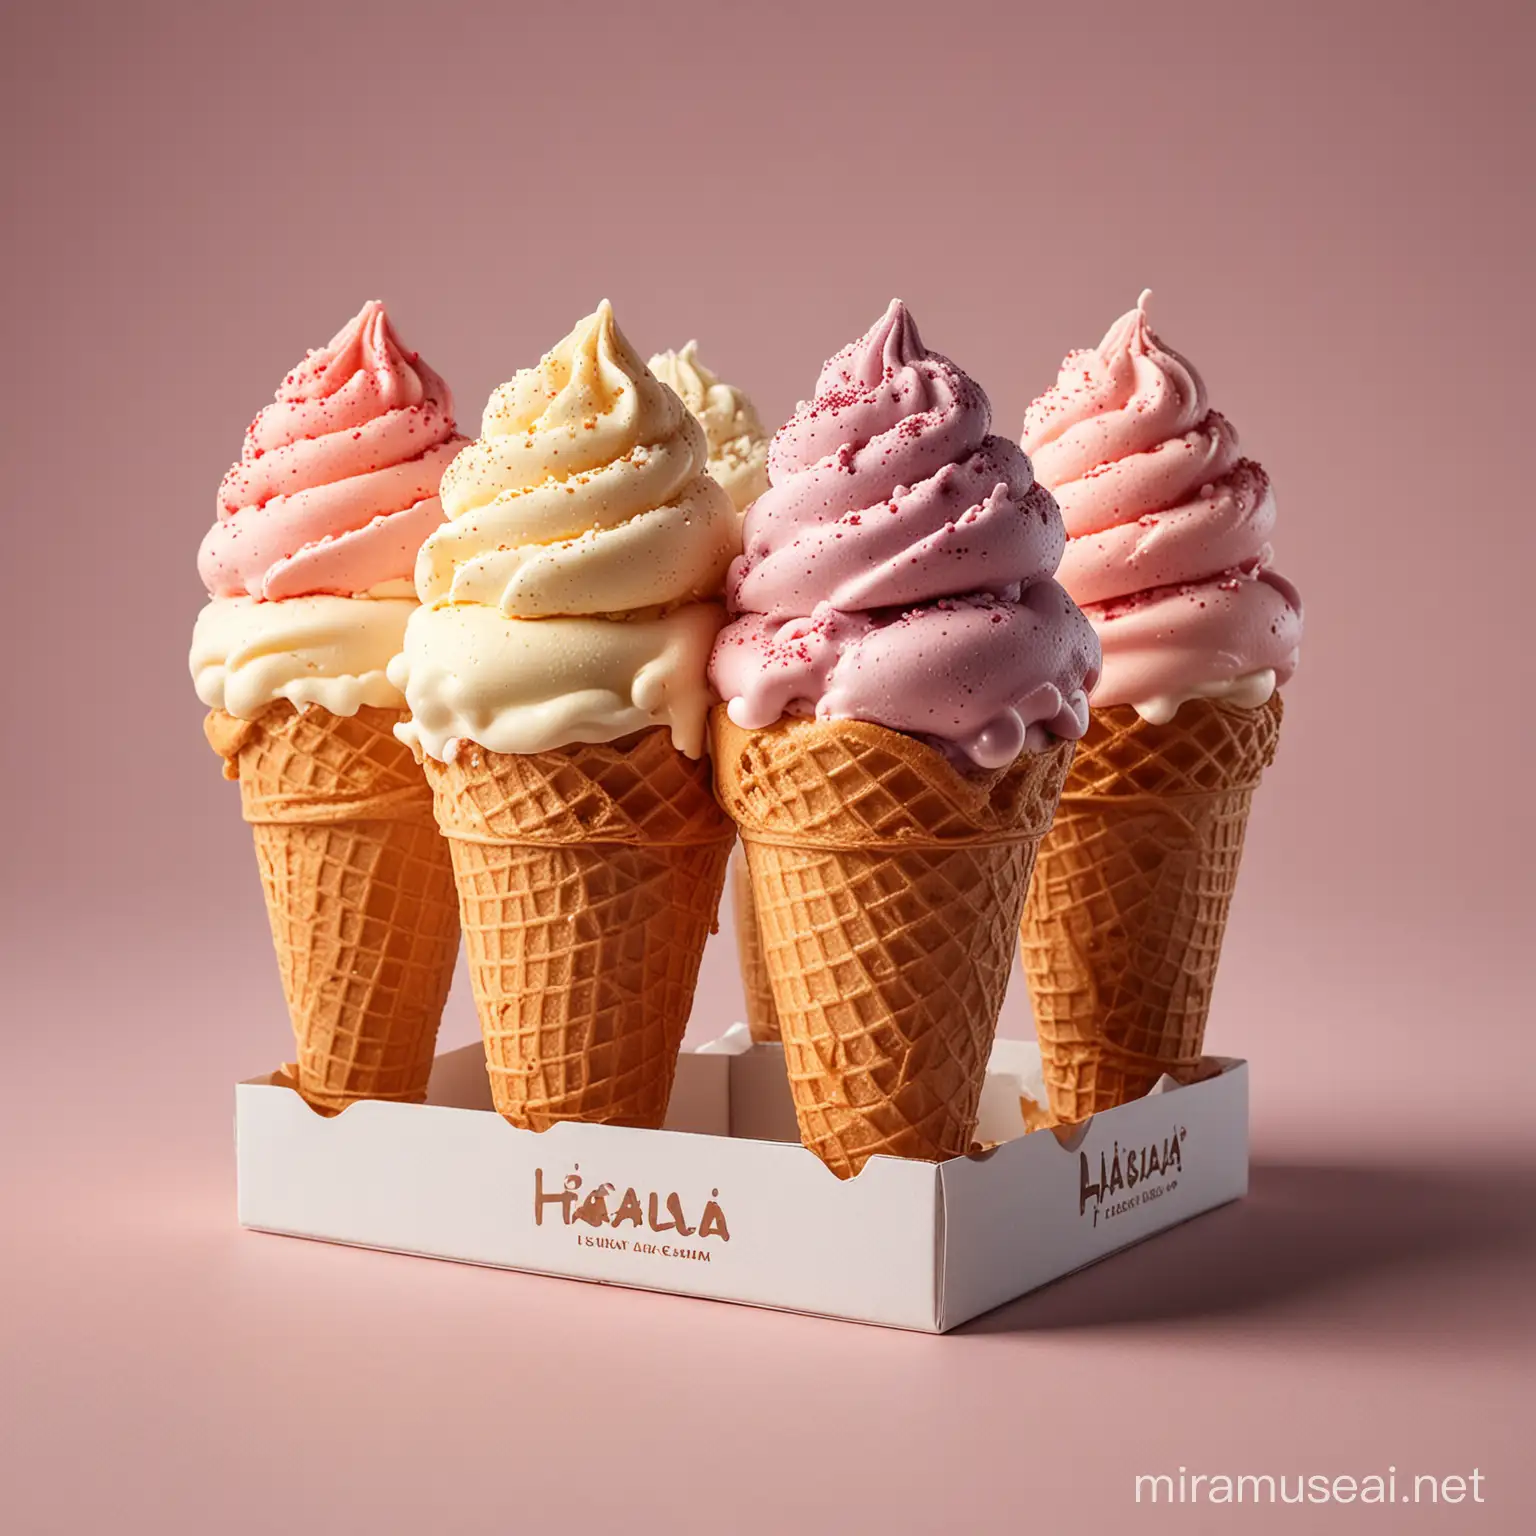 Create a product photo for a collection of 5 variants of soft ice cream in black 1 kg sachet packaging with Hyperrealism style. On the lower left side, there is a halal logo from Indonesia in a white box and it says "HALAL". On each package there is a picture of soft ice cream that has just been made from an ice cream machine on top of a brown ice cream cone. The variants are chocolate, vanilla, red velvet, strawberry and taro. soft bright plain color background.